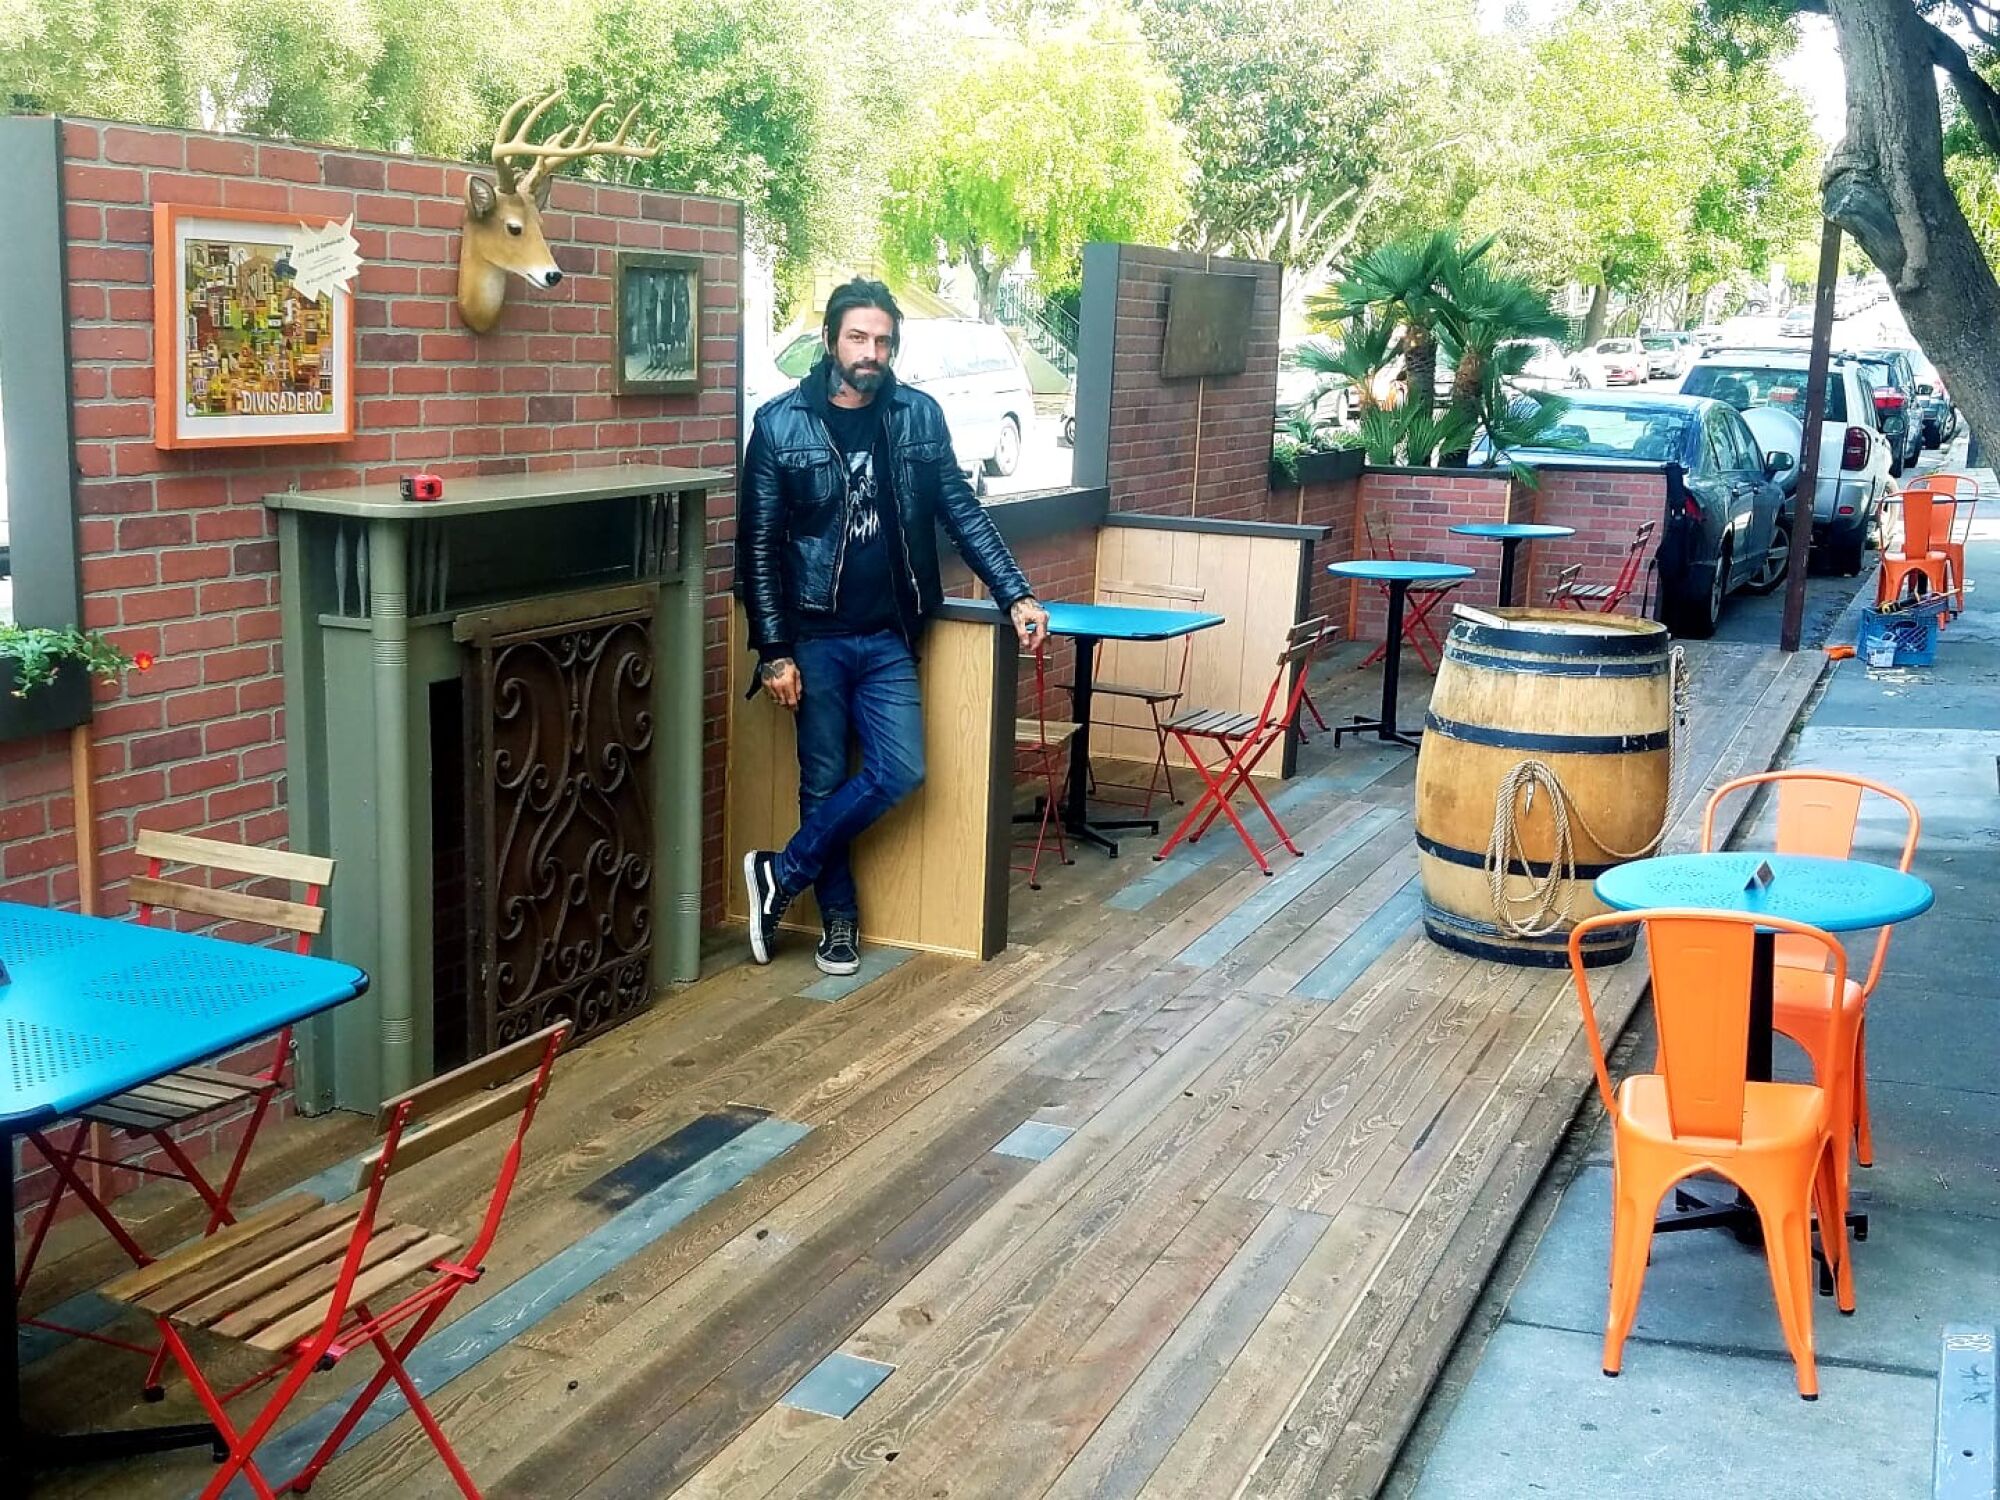 Mattie Breen's new outdoor space for the Page re-creates the bar's interior vibe for pandemic times.